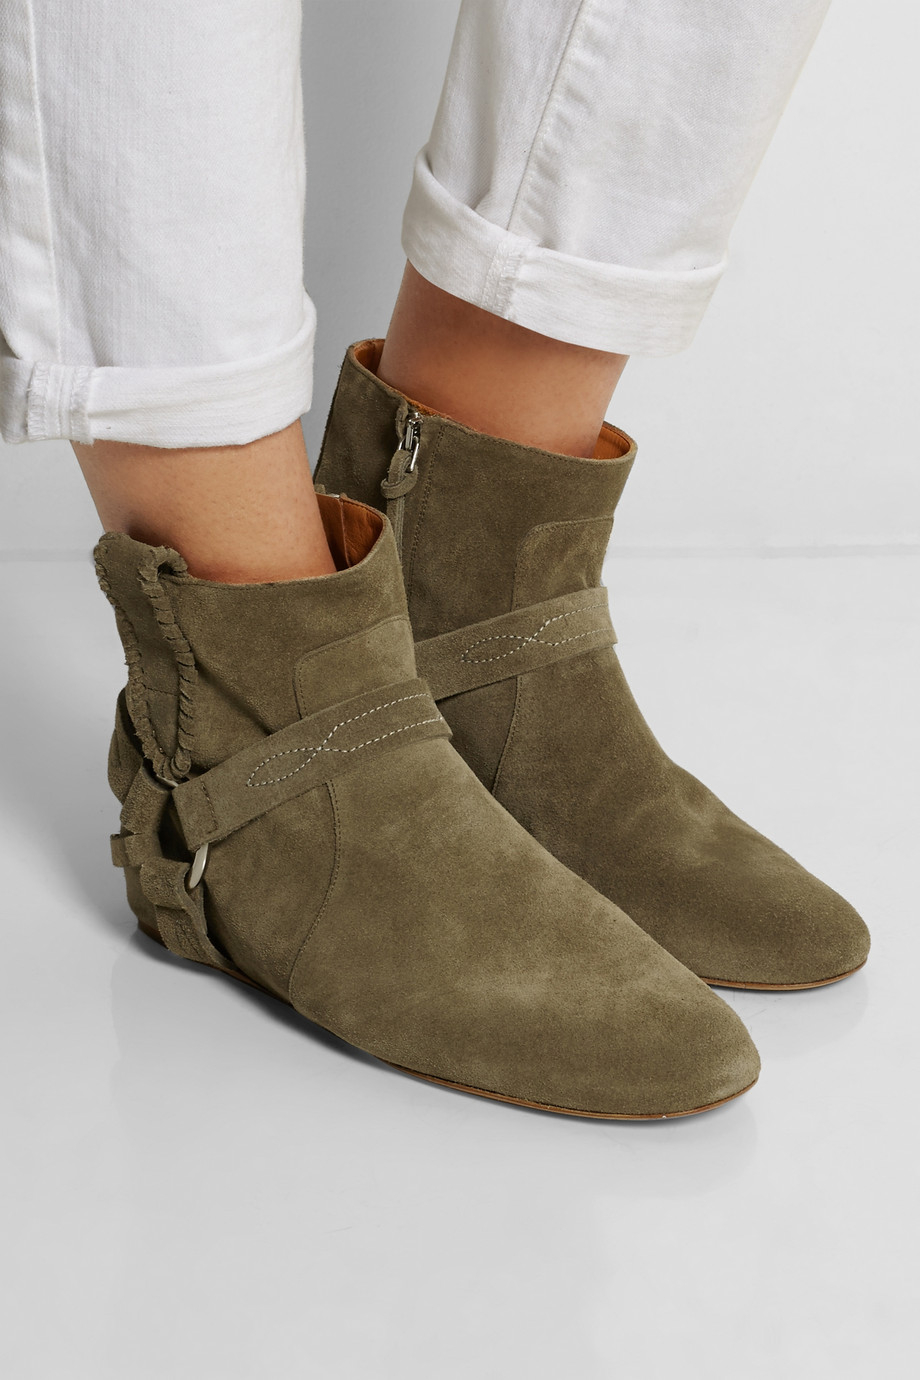 Lyst - Isabel Marant Étoile Ralf Suede Ankle Boots in Brown